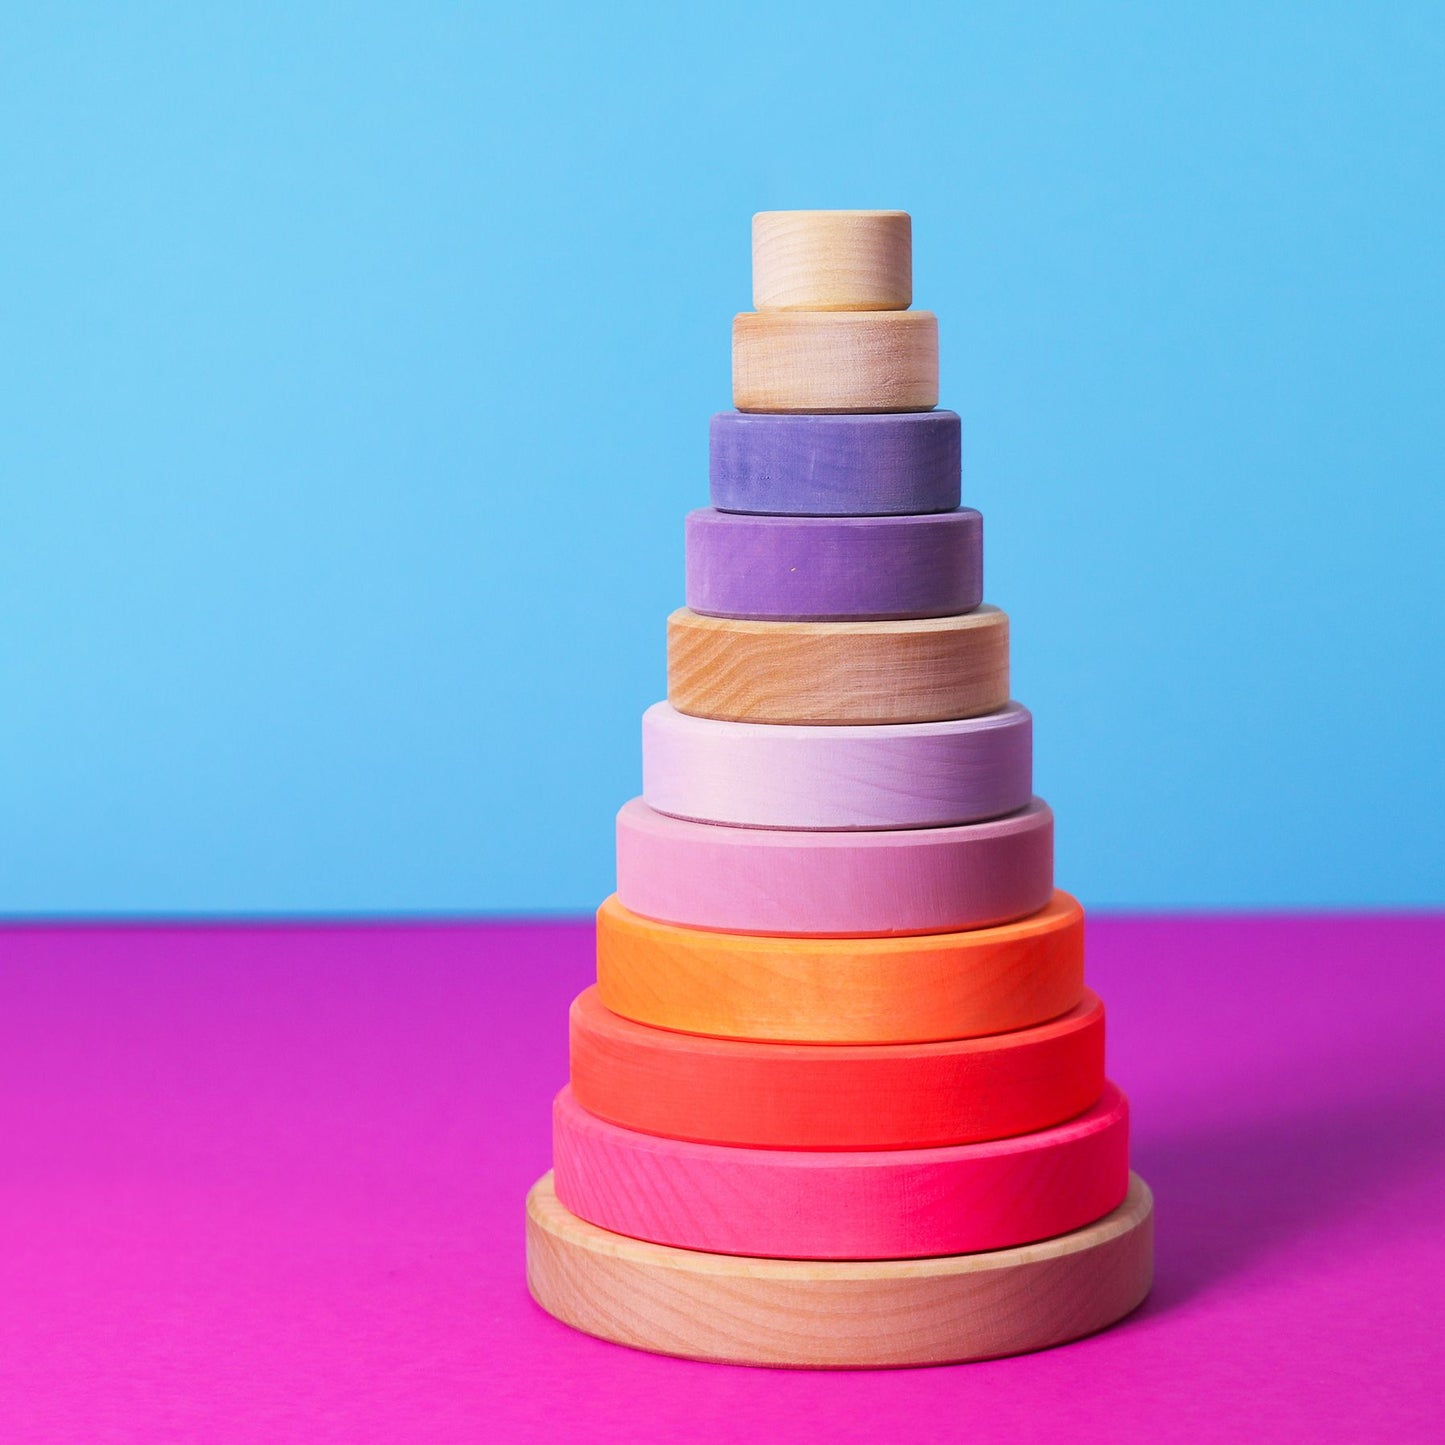 Neon Pink Conical Tower Stacker | Grimm's X Neon Collection